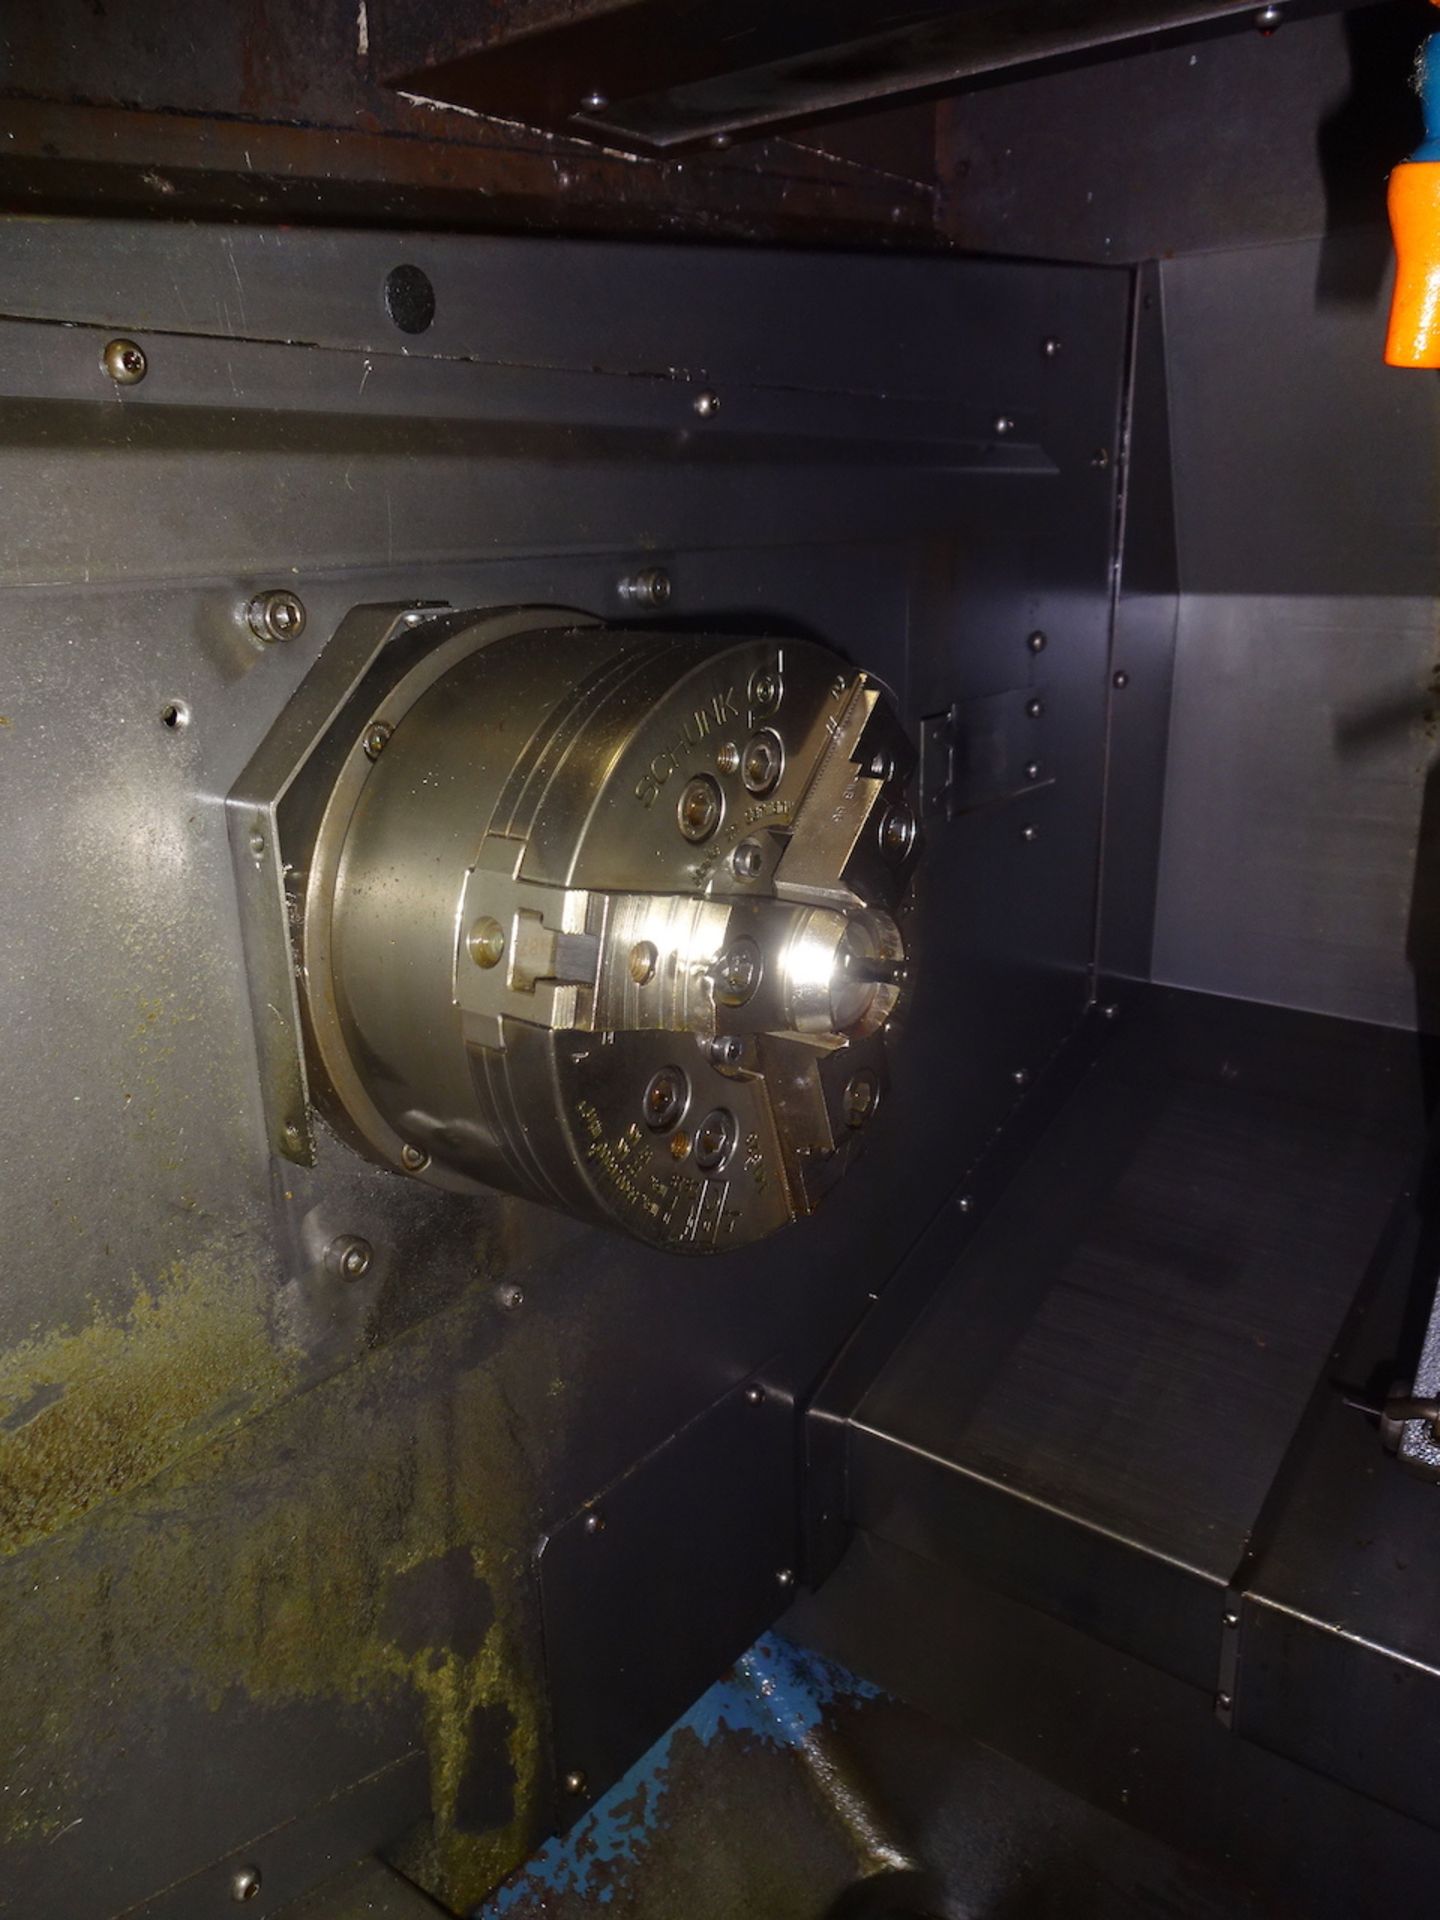 2000 MIYANO MODEL LZ-01R CNC 2-AXIS TURNING CENTER, S/N LZ1R0183, 6 IN. 3-JAW CHUCK, 12-POSITION - Image 5 of 7